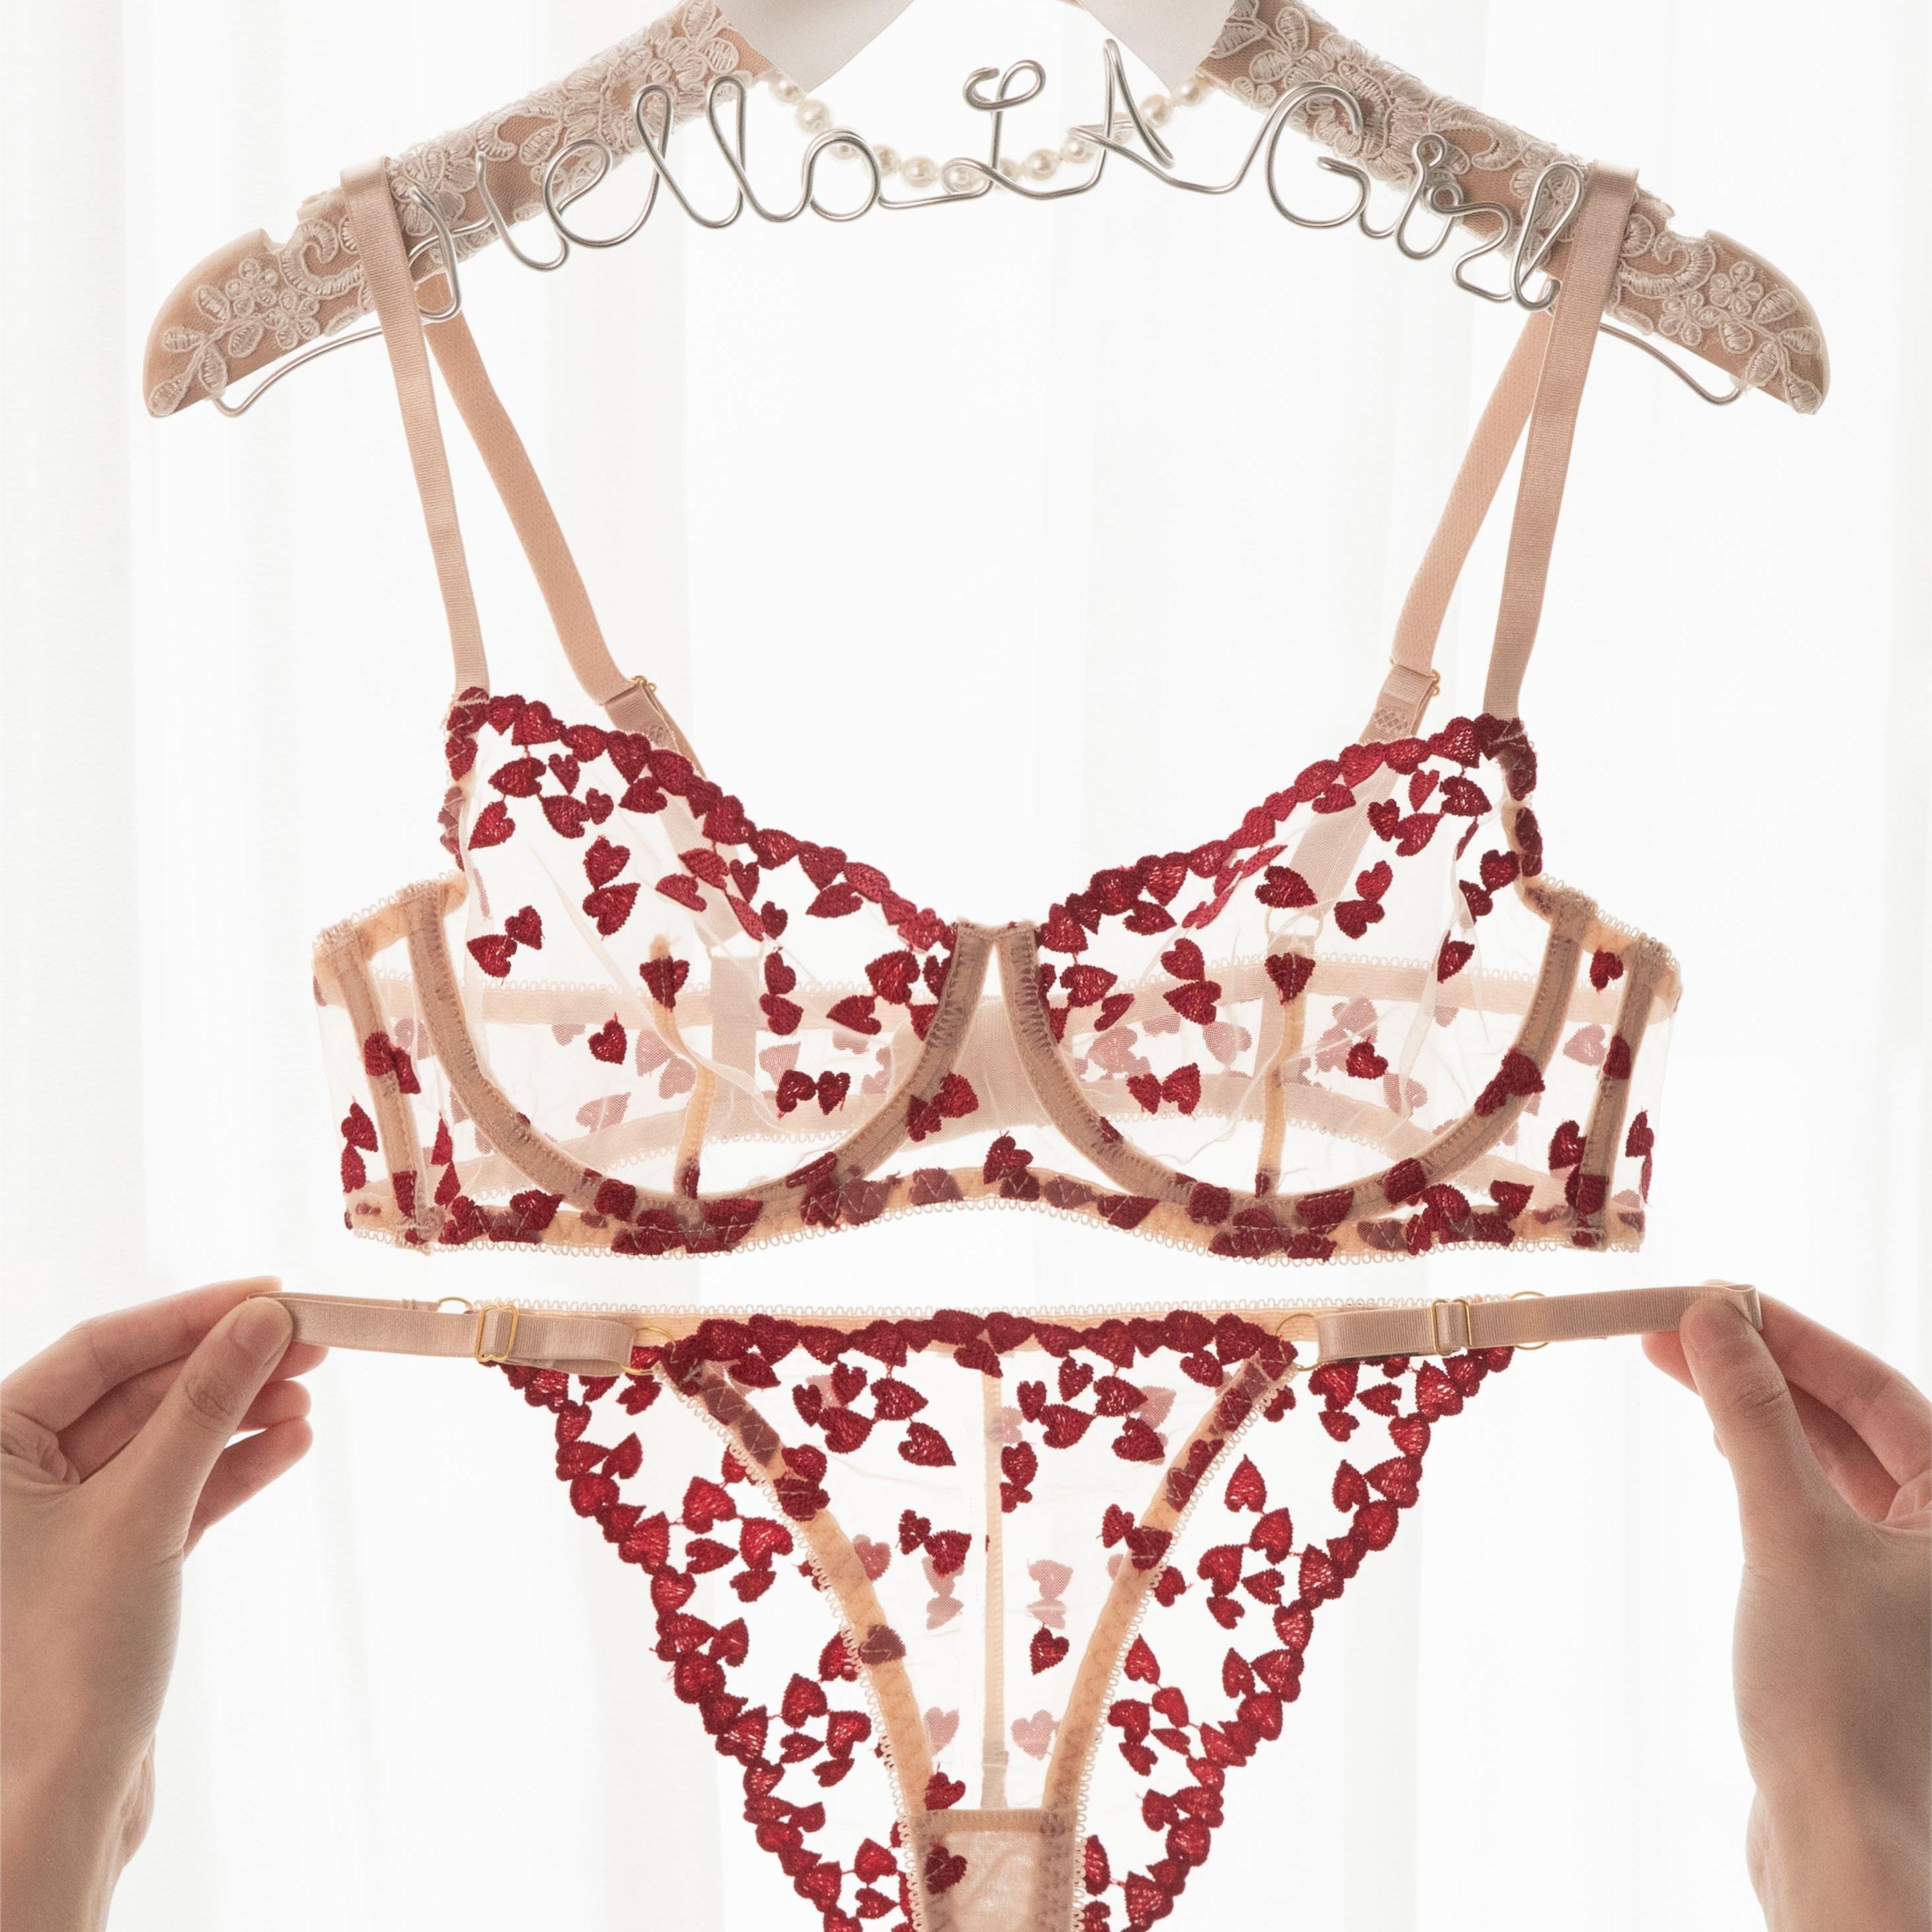 Red Little Heart Embroidery Sheer Lace Lingerie Set